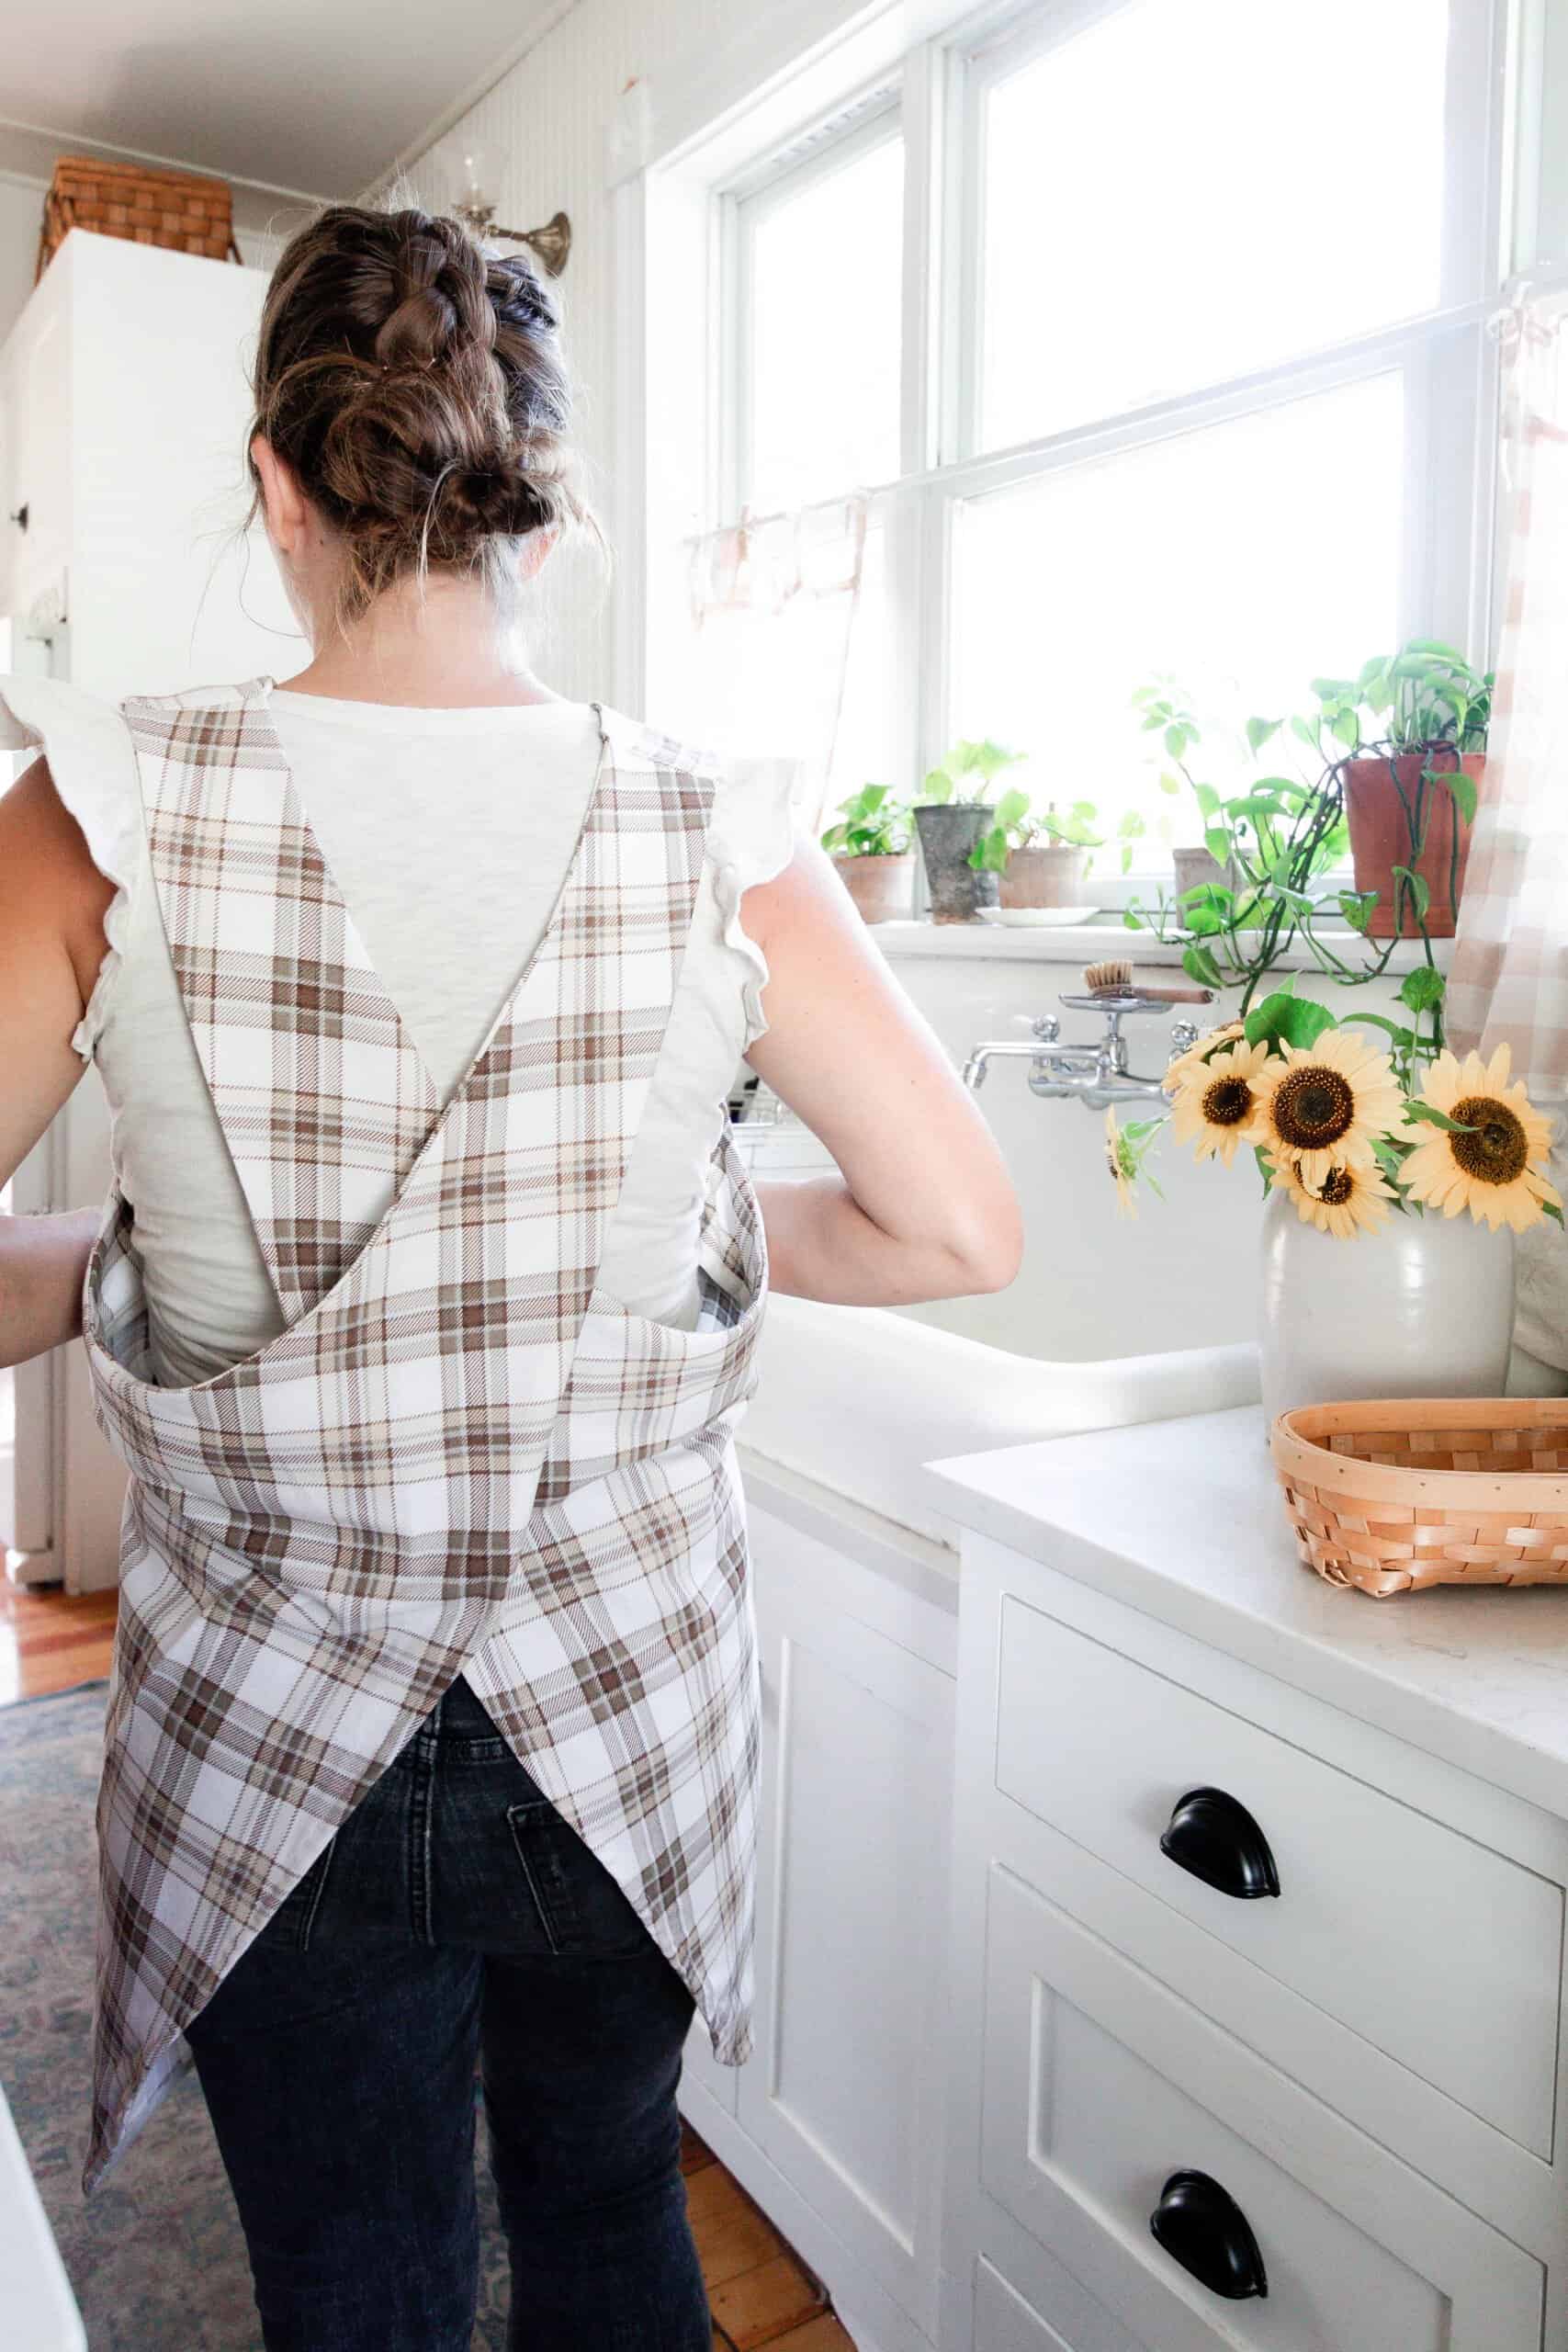 One Yard Sewing Project: Linen Apron Tank Top Tutorial